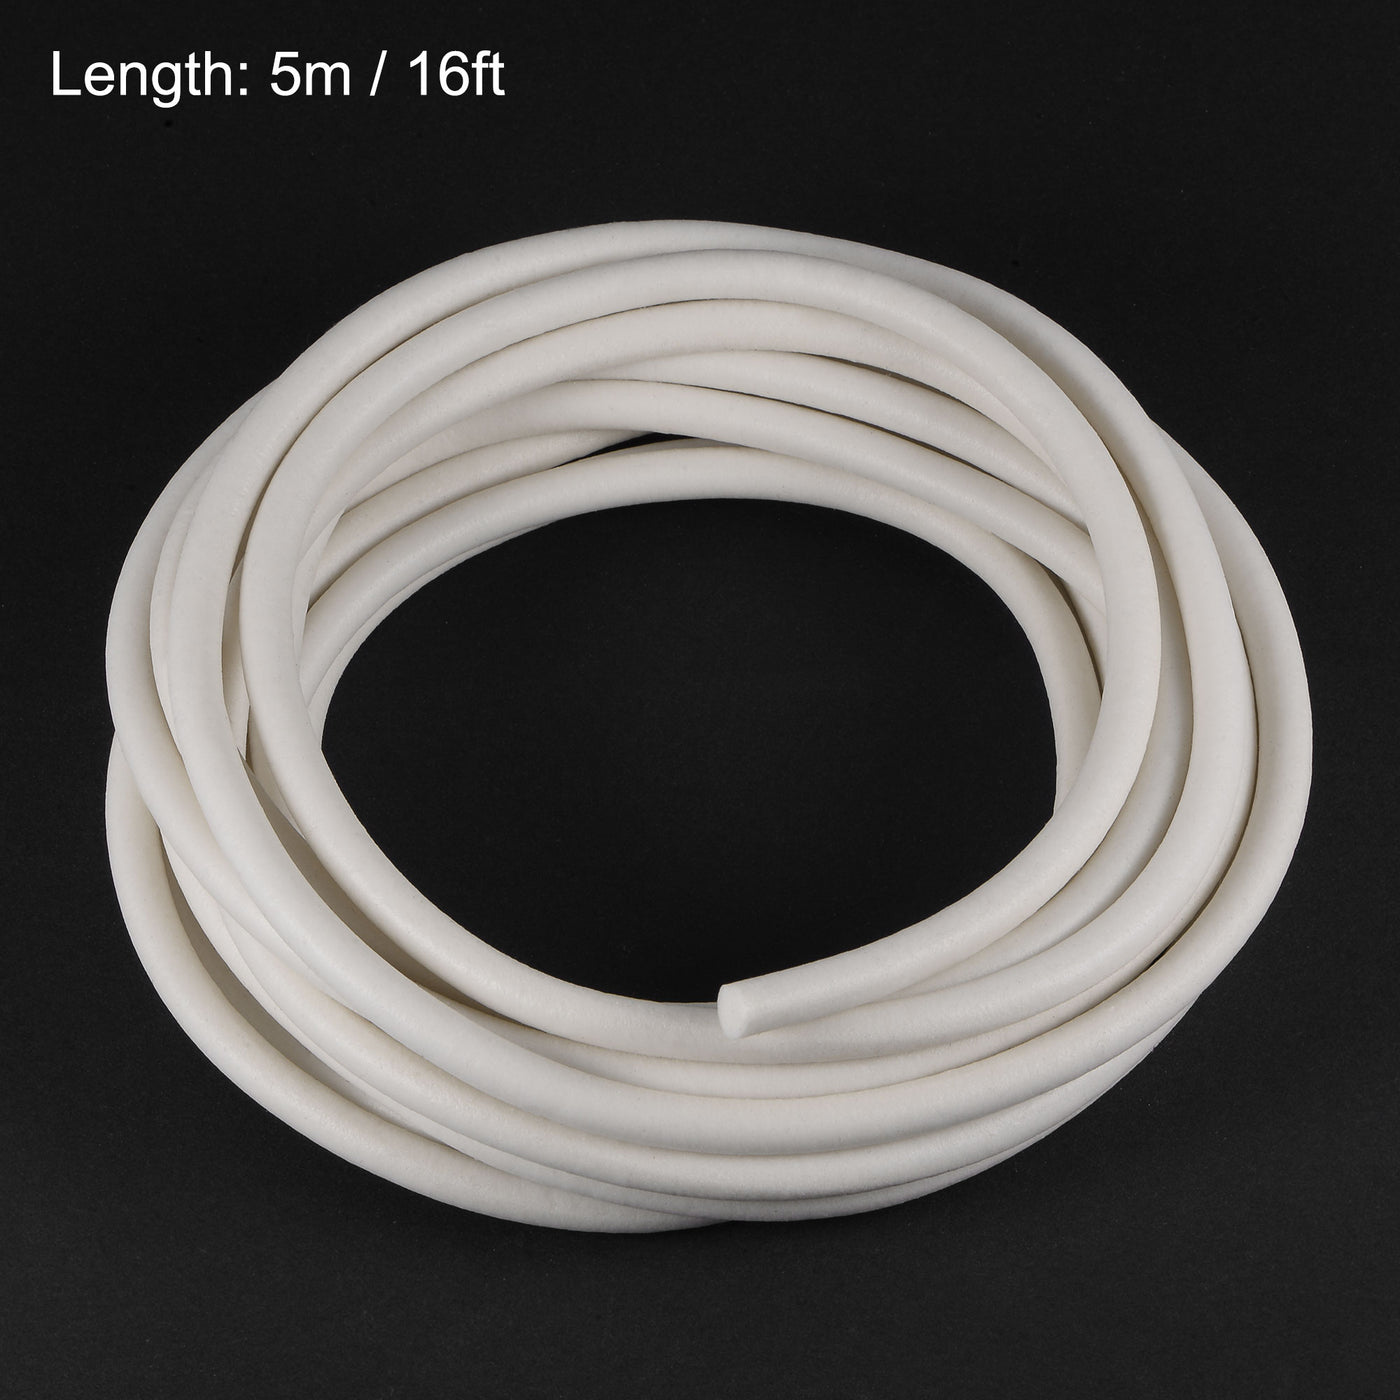 uxcell Uxcell 1/4"(6mm) Soft Silicone Bending Insert Tube for Rigid Tubing 16ft White